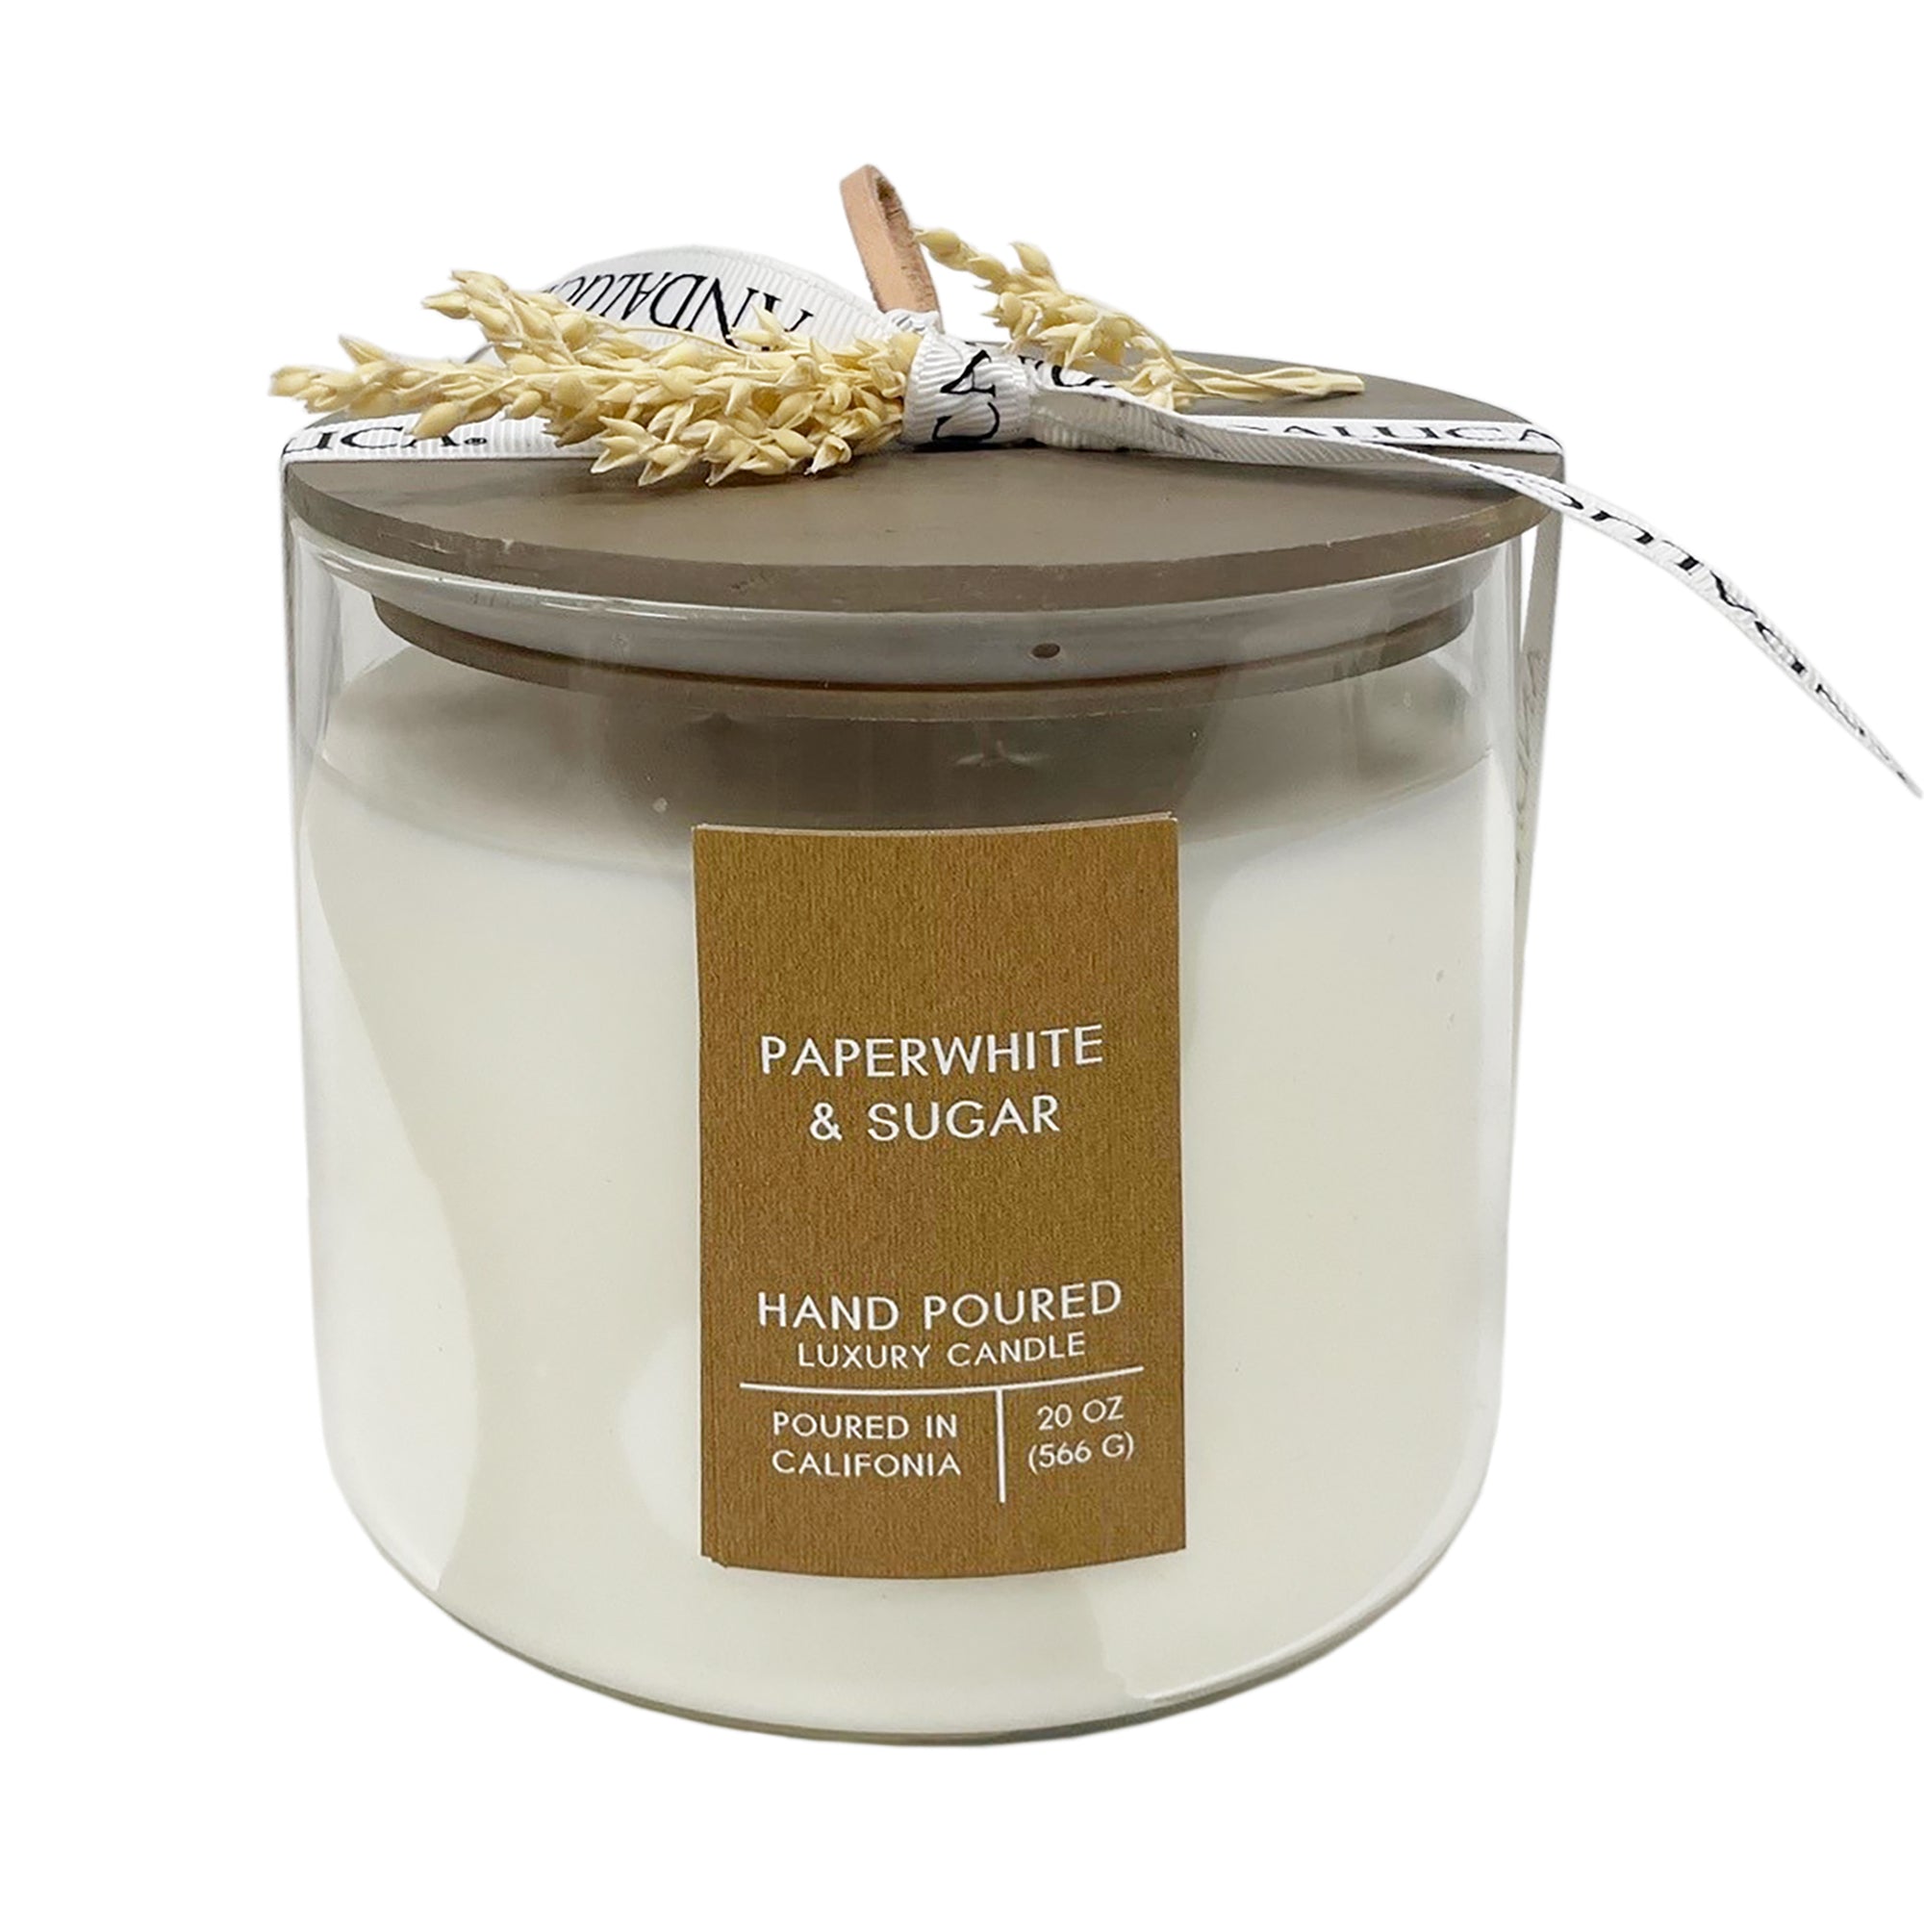 Paperwhite & Sugar Botanical Tie 20 oz. Candle with Lid